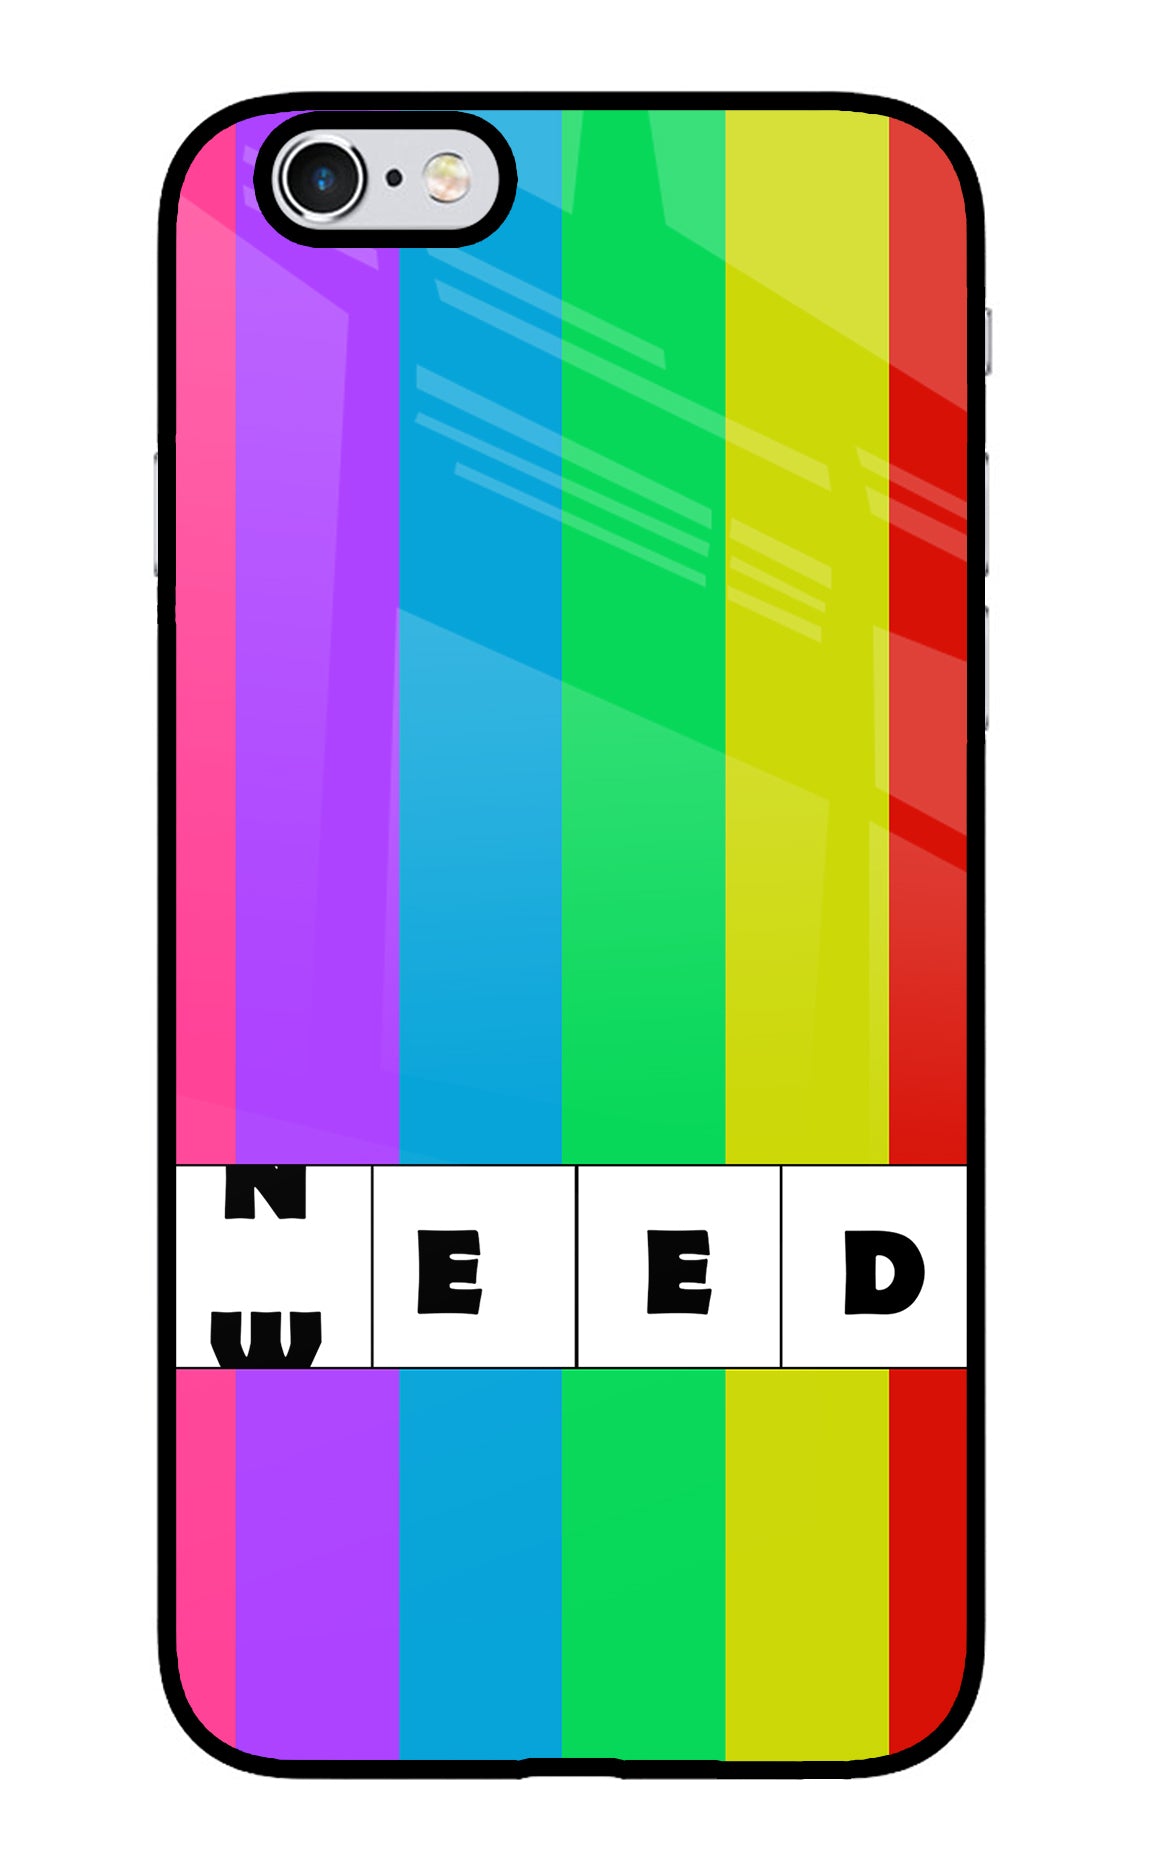 Need Weed iPhone 6/6s Back Cover